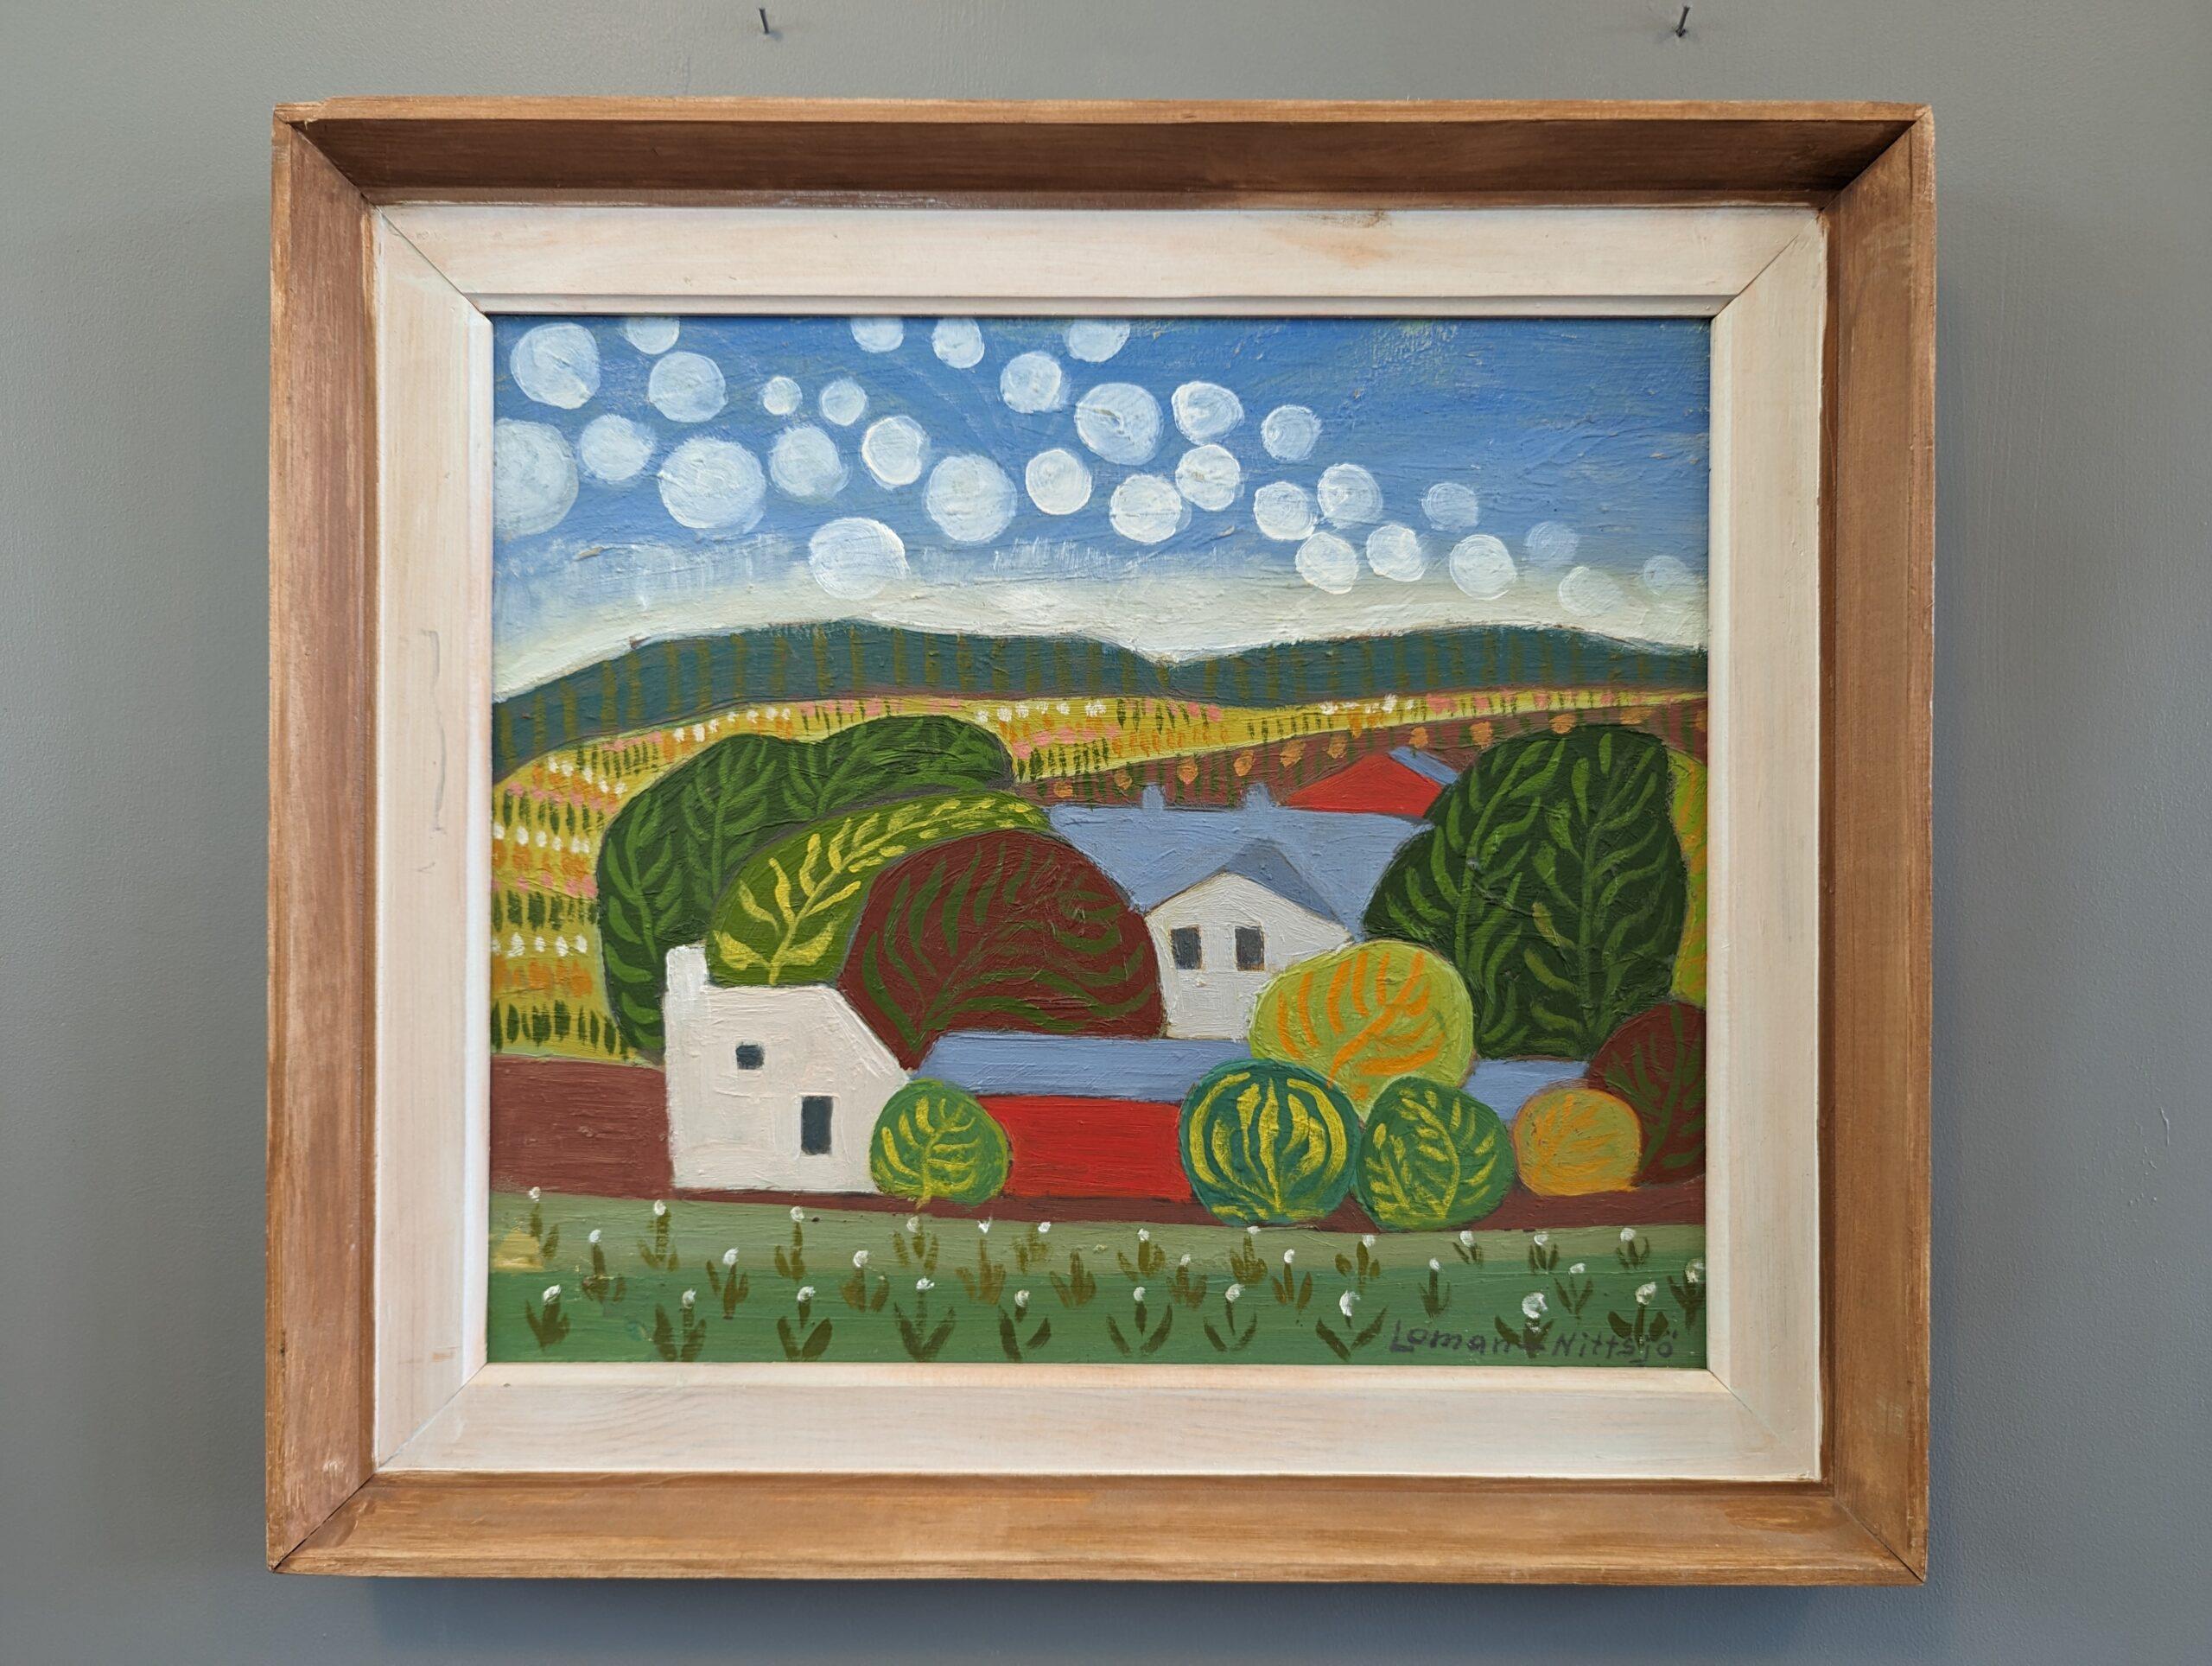 WONDERLAND
Size: 39 x 43.5 cm (including frame)
Oil on board

A fun and whimsical mid-century landscape composition, painted in oil onto board.

In this uplifting composition, we see white farm houses nestled within rolling fields.  In this picture